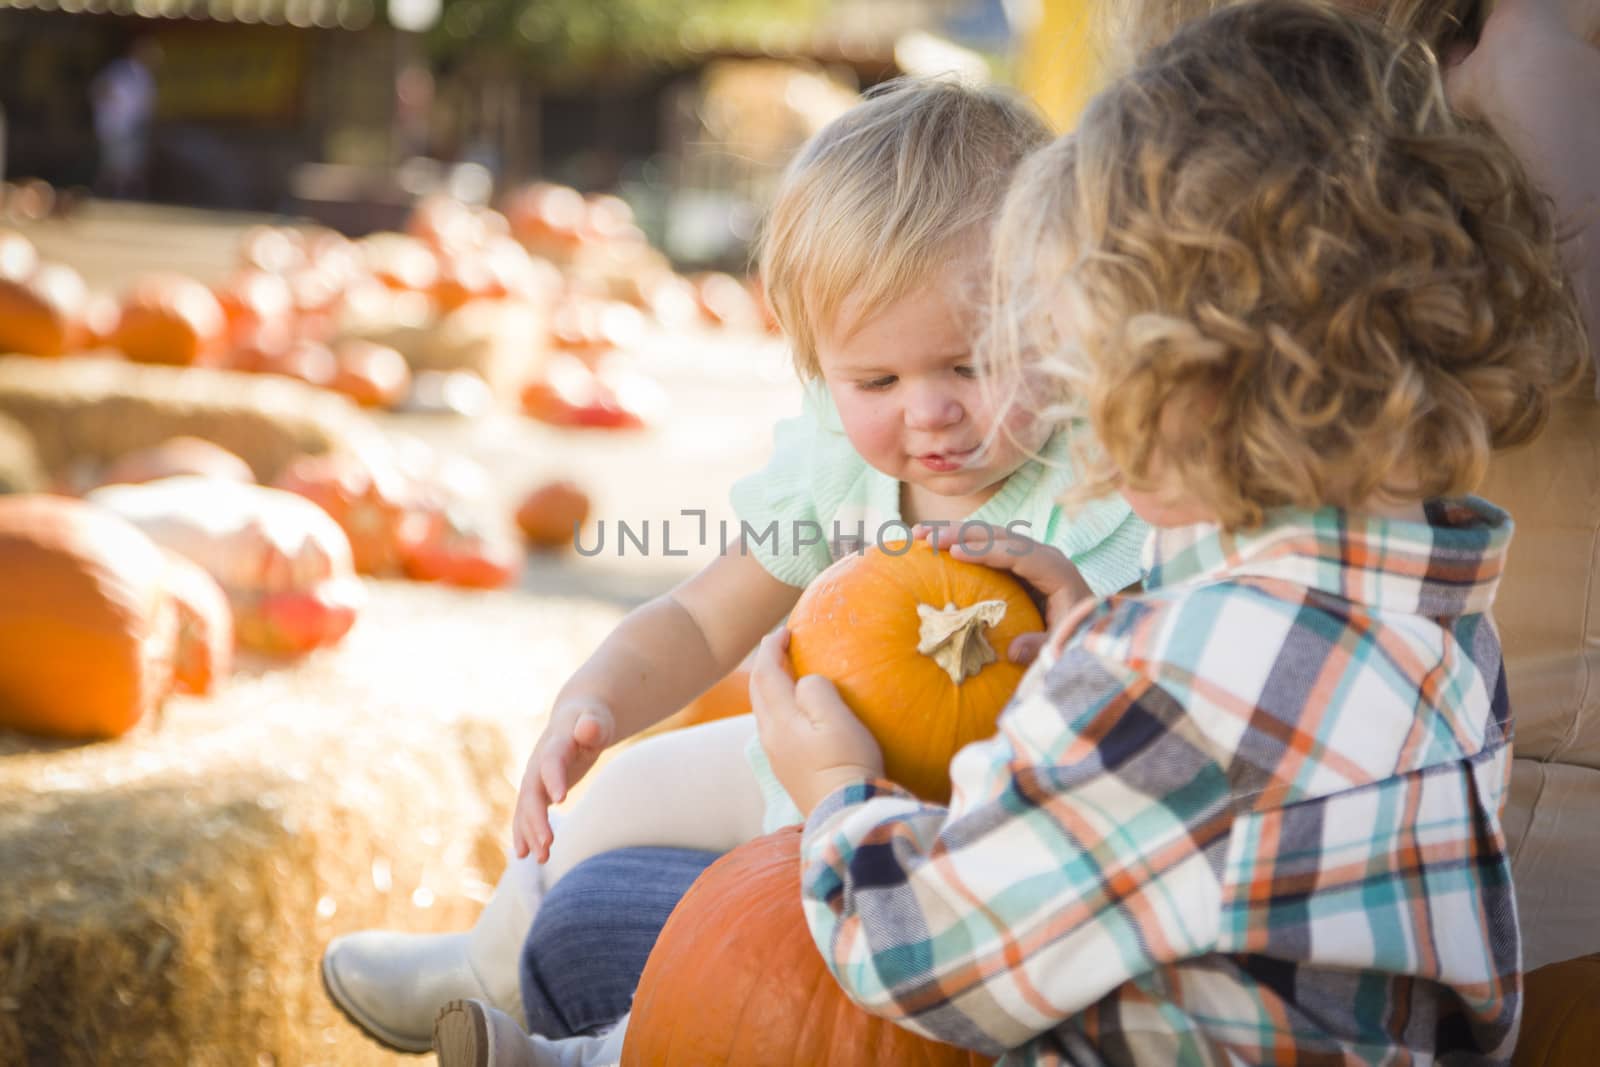 Young Family Enjoys a Day at the Pumpkin Patch by Feverpitched